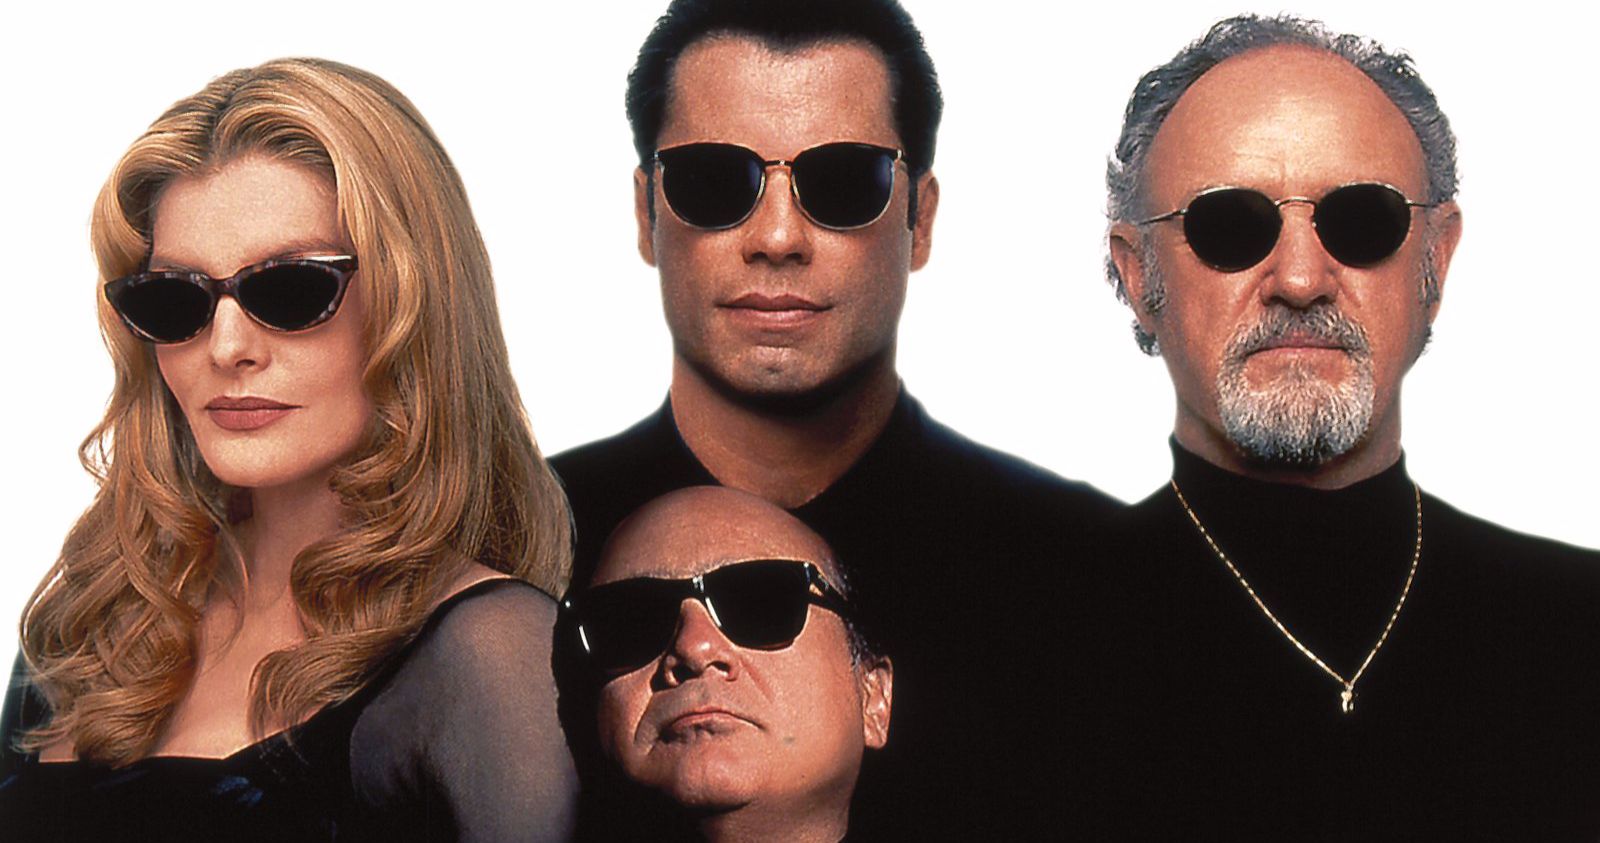 Get Shorty Only Made One Change When John Travolta Took the Lead from Danny DeVito